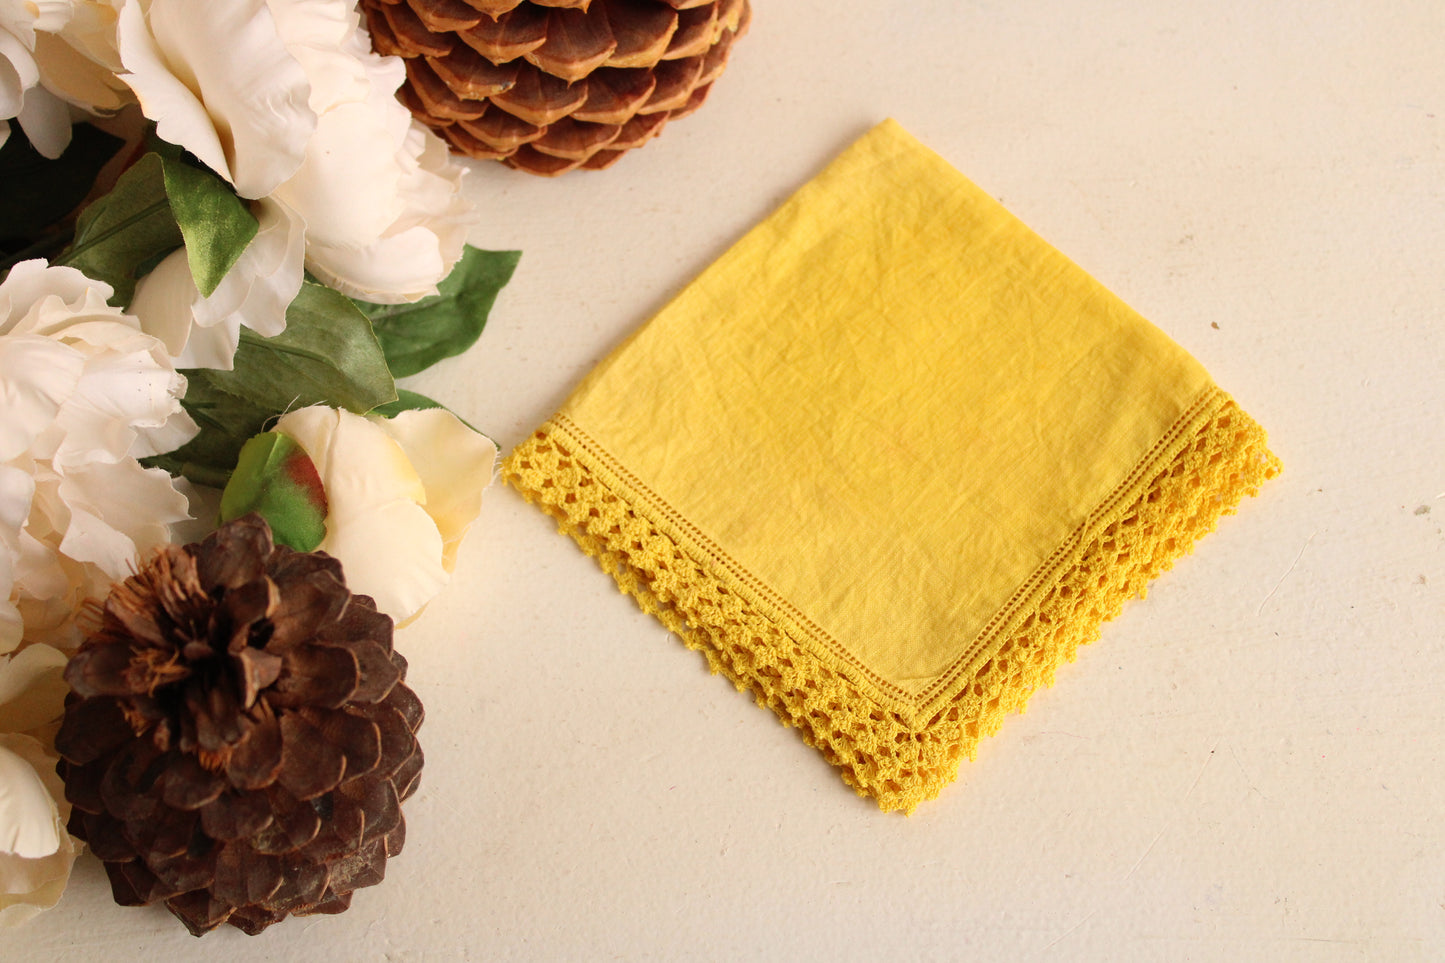 Hand Plant Dyed Yellow Linen Vintage Handkerchief with Crochet Lace Trim